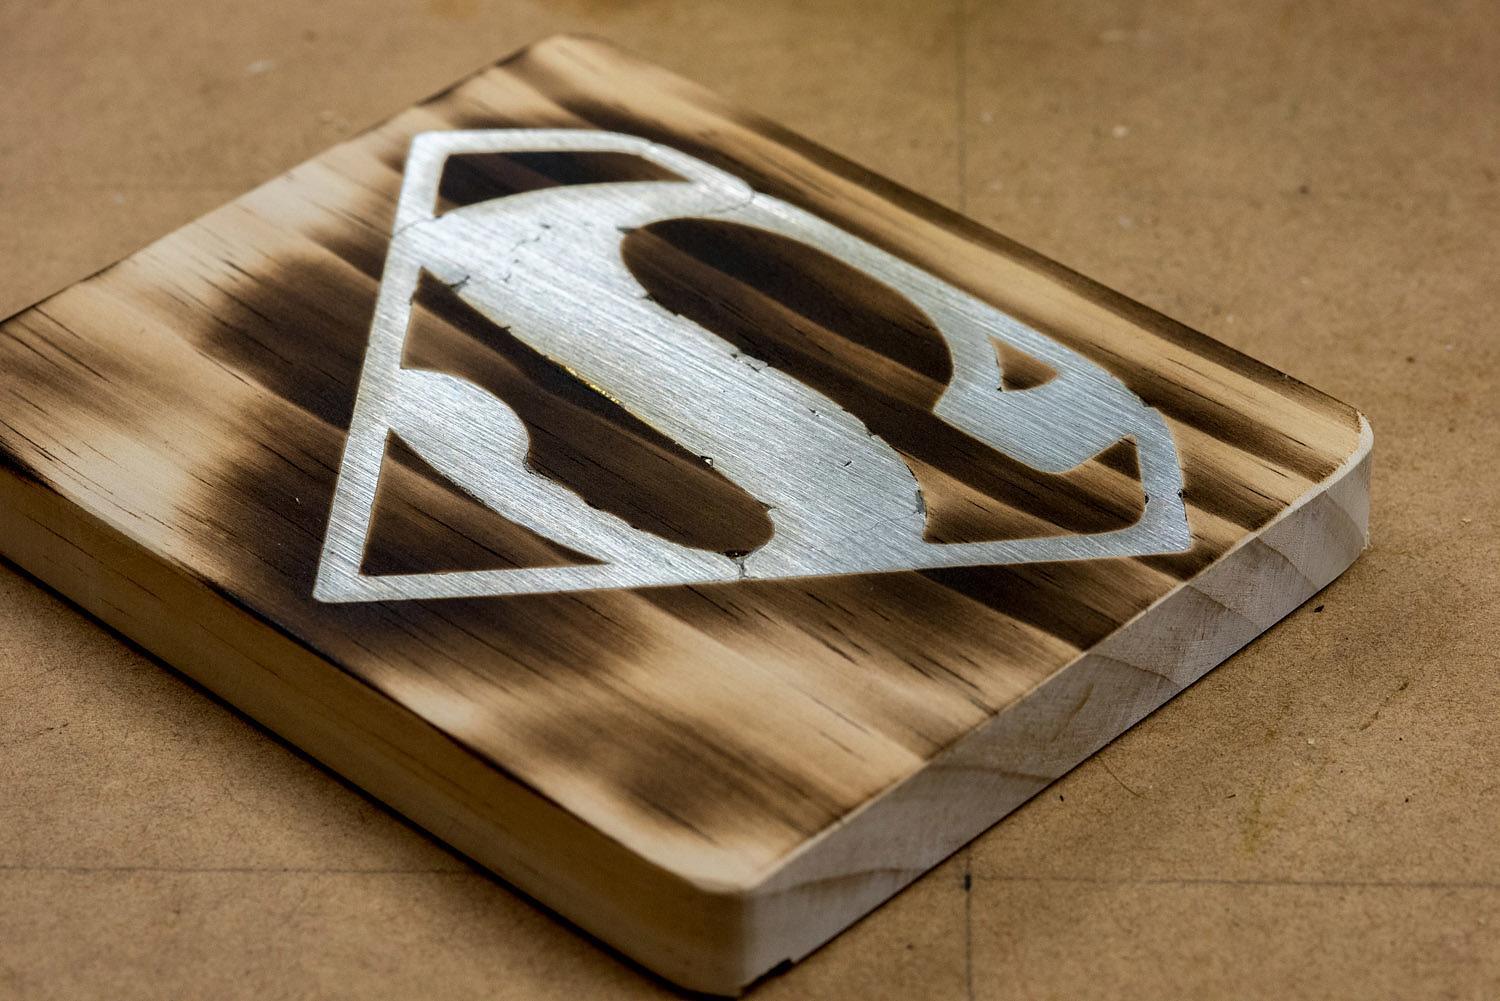 How to Create an Easy Inlay in Wood with Solder | Make: